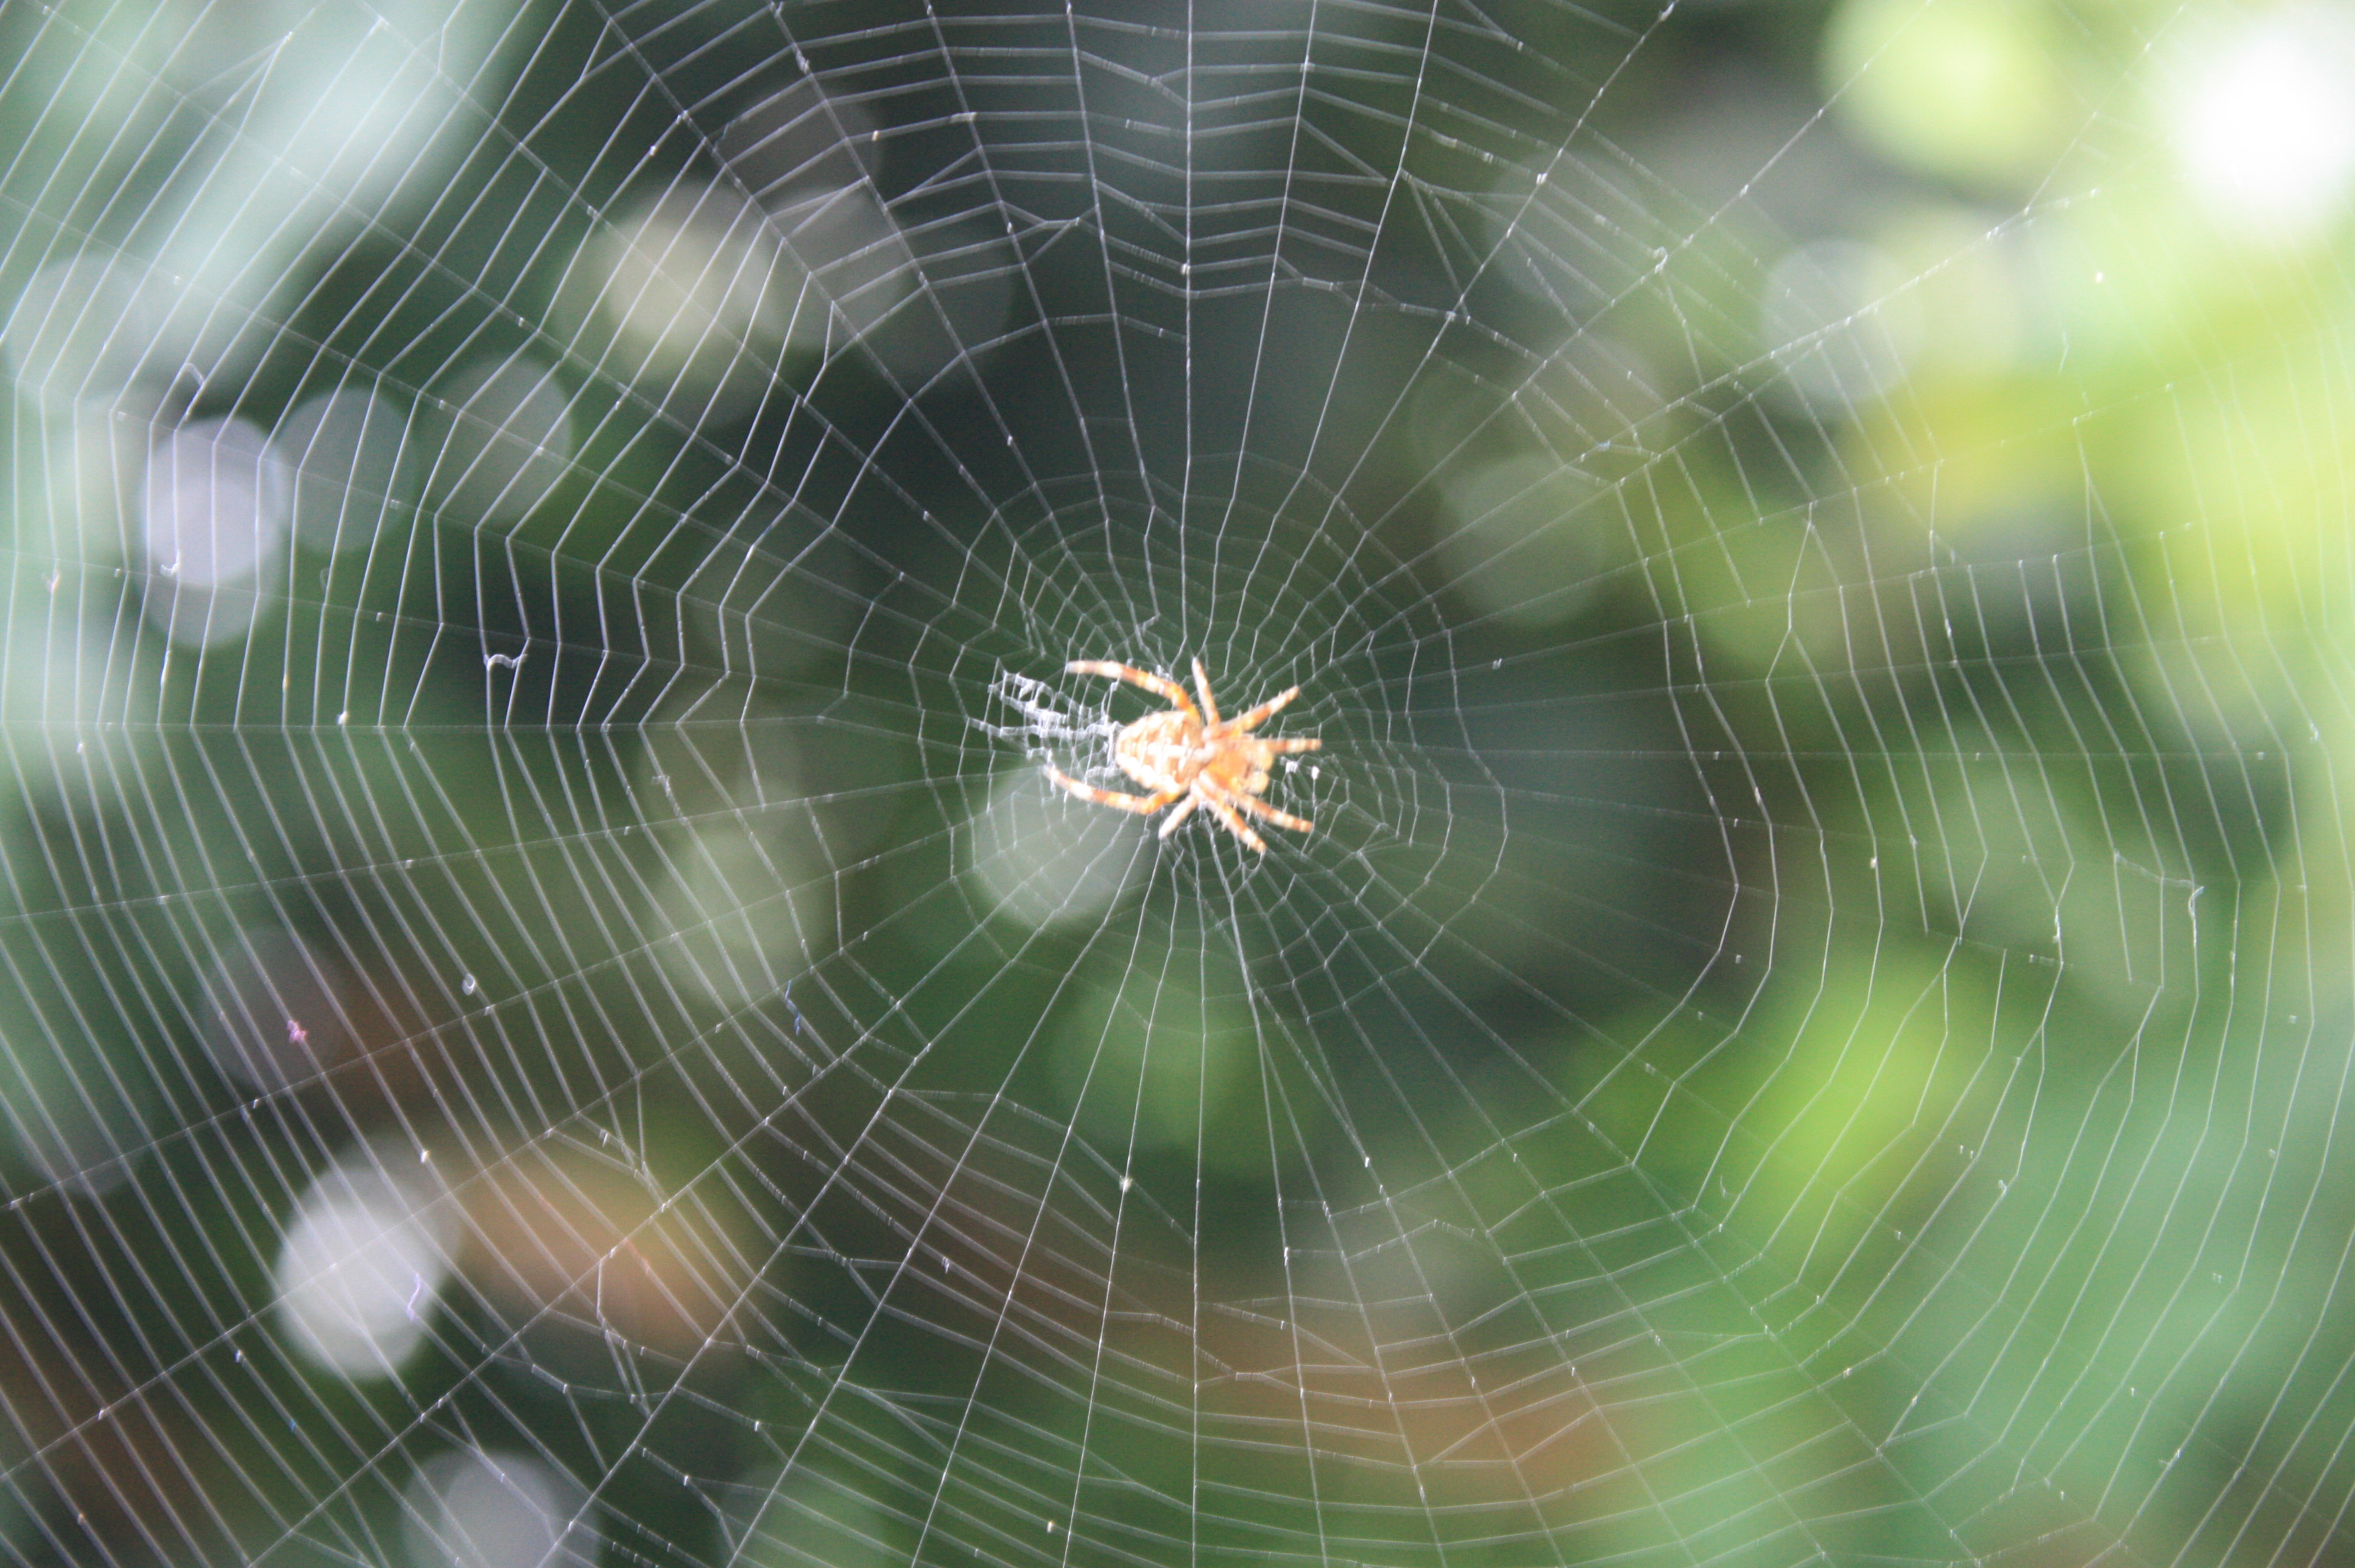 Small spider in a circular web